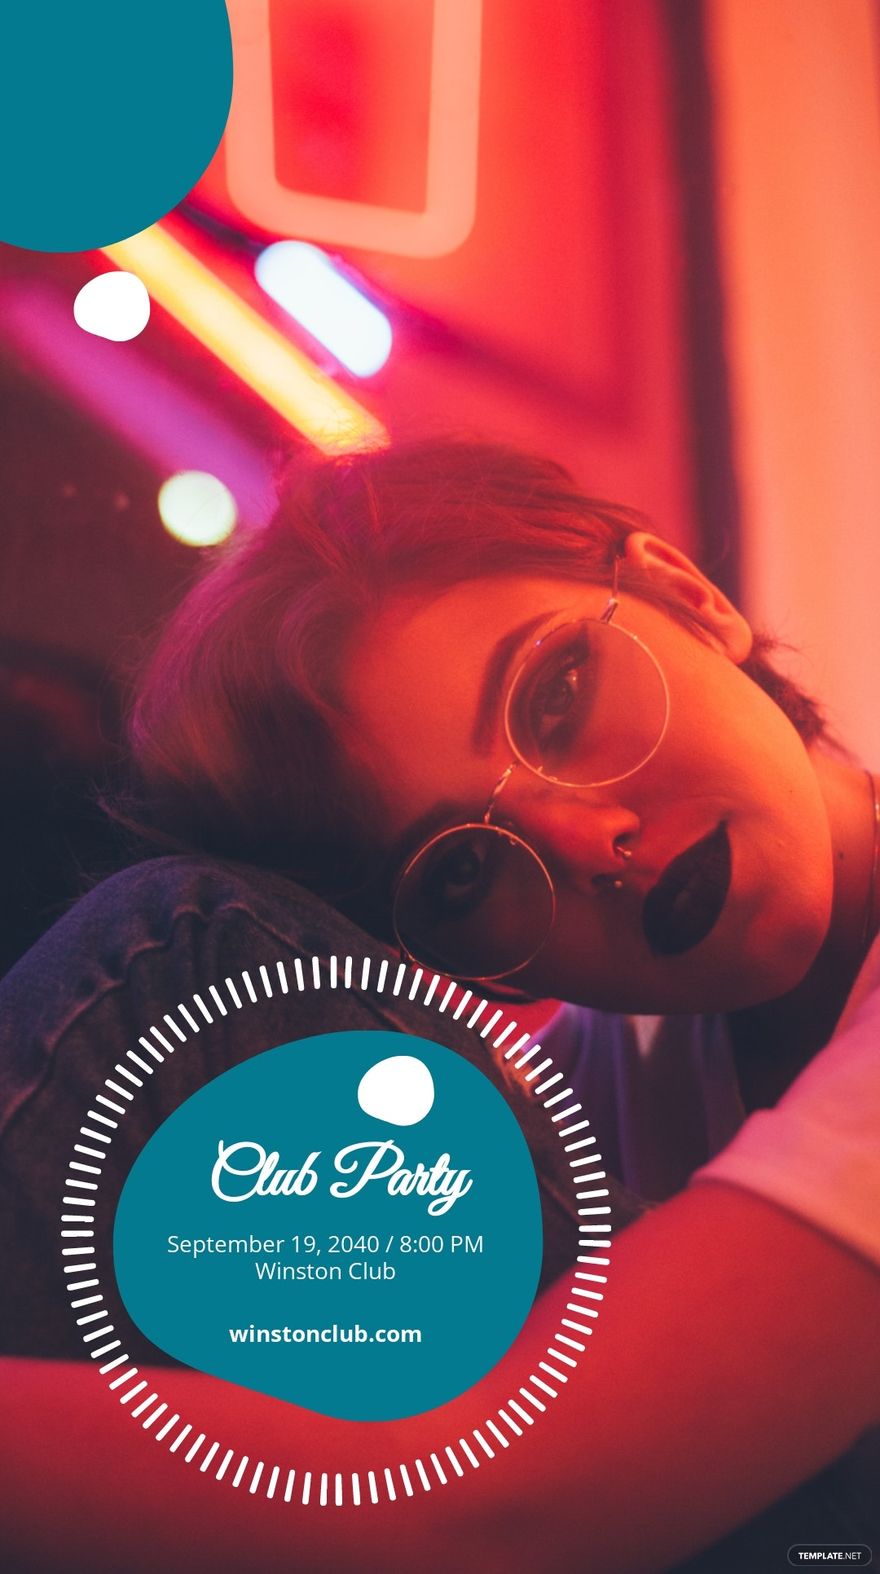 Club Party Instagram Story Template